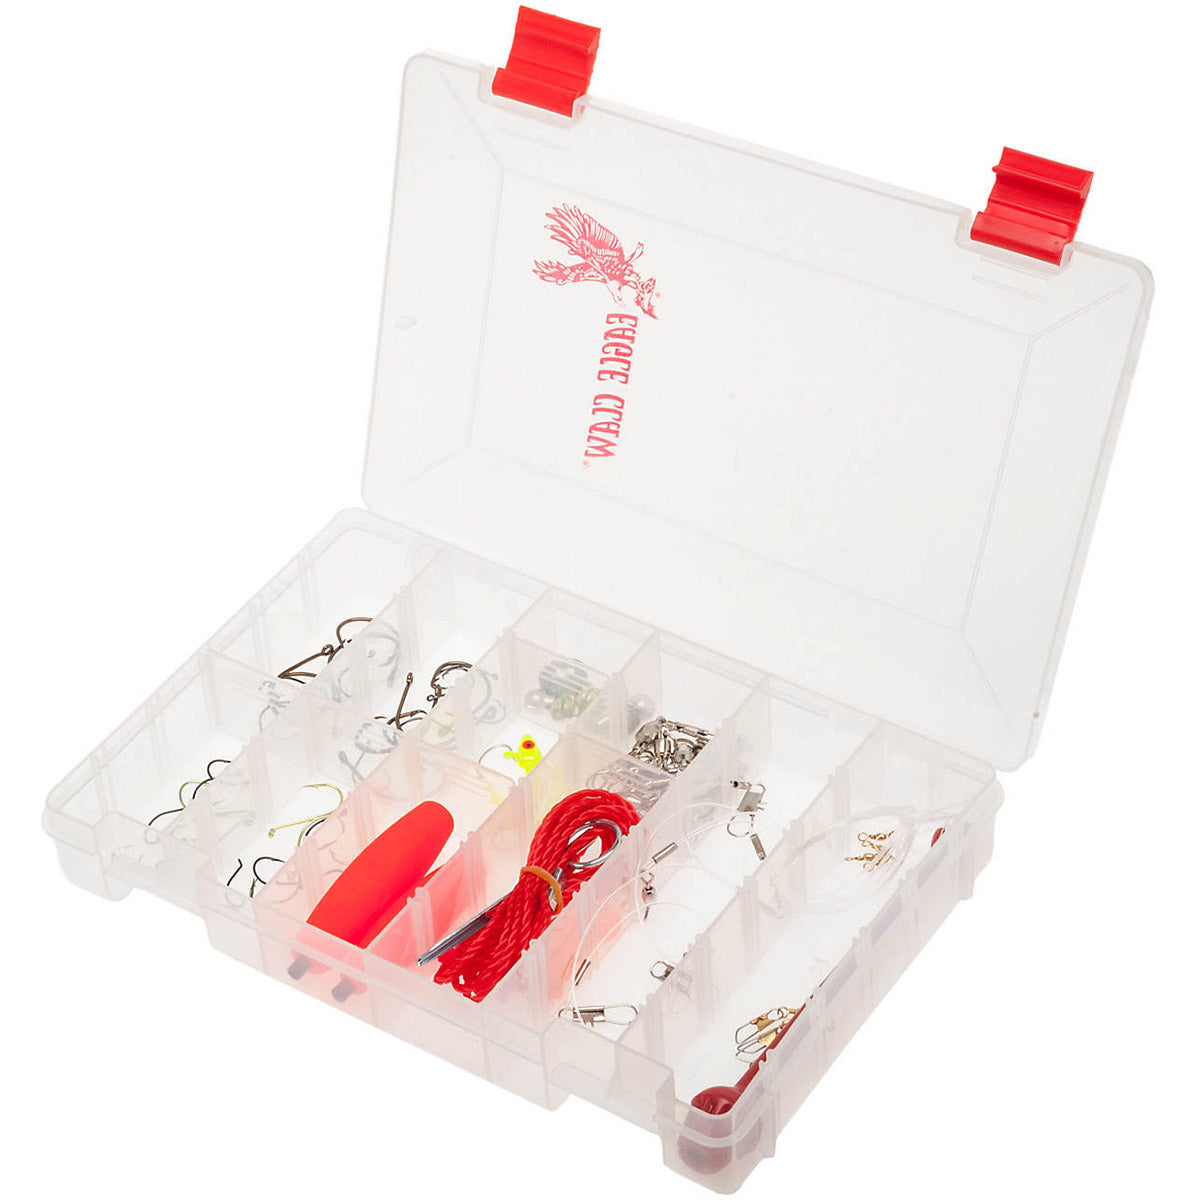 Eagle Claw E.C. Fresh Water Tackle Kit